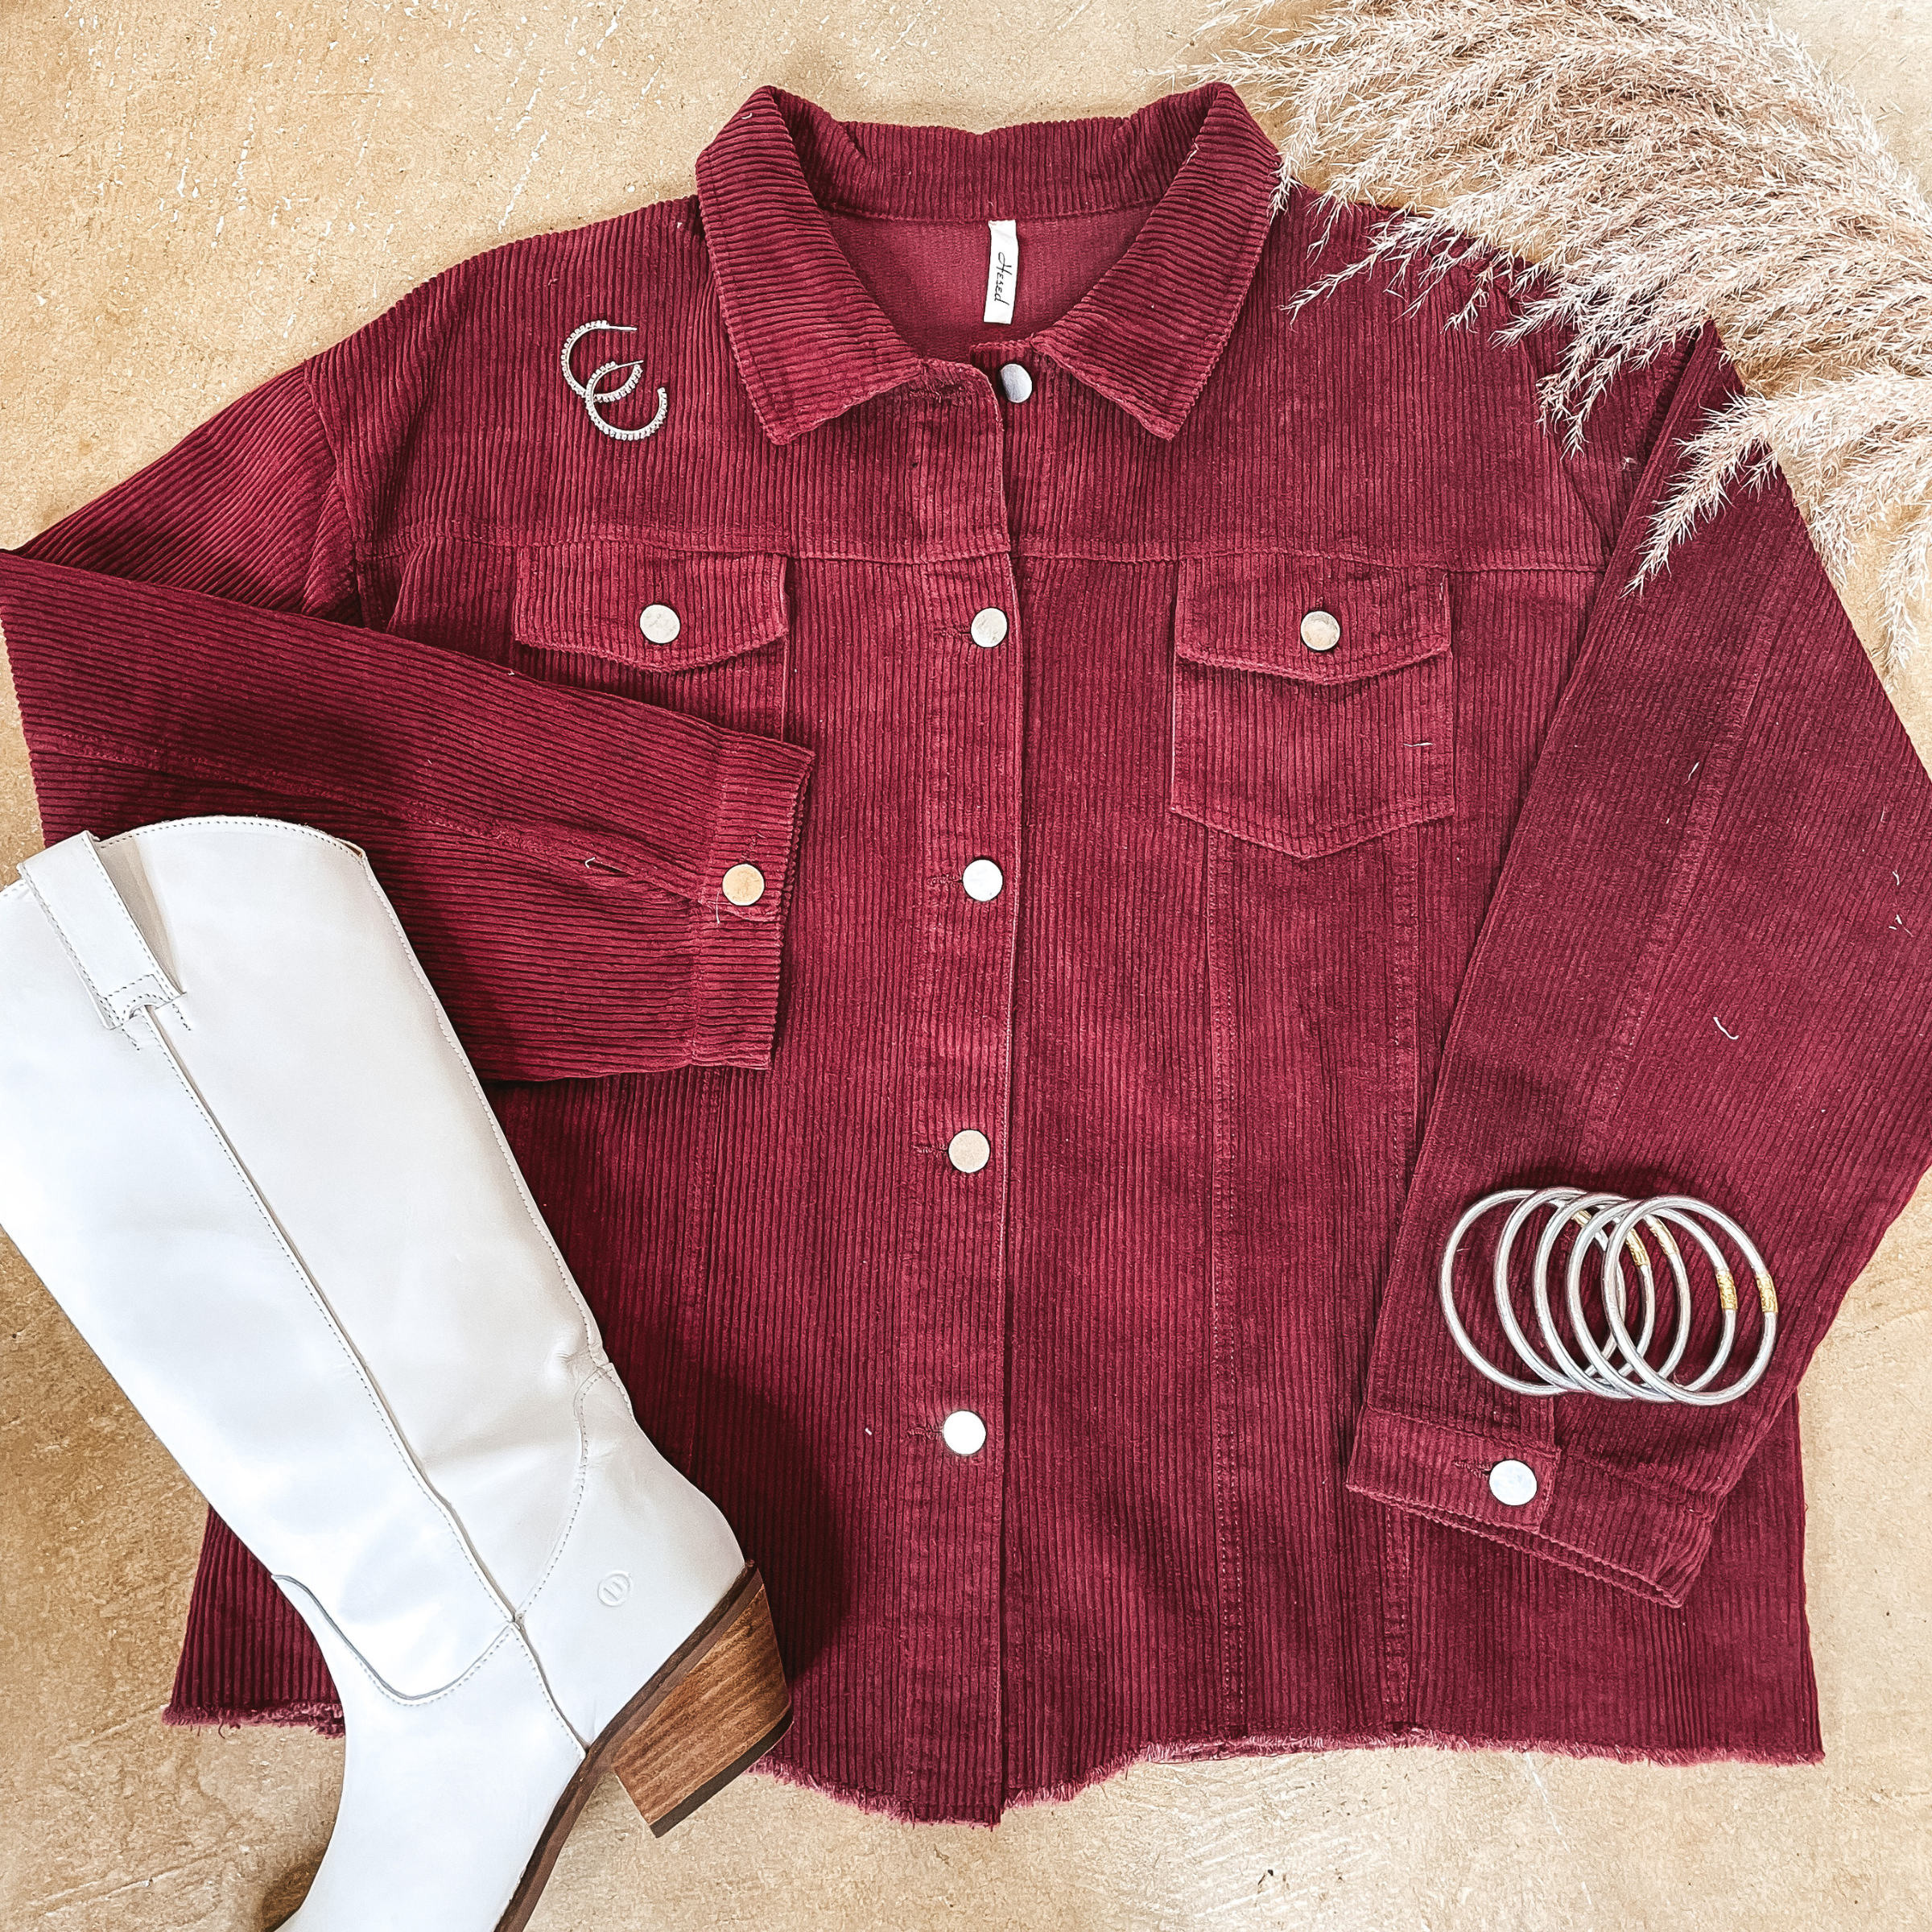 A maroon corduroy shacket pictured on a concrete background with white boots and silver jewelry.